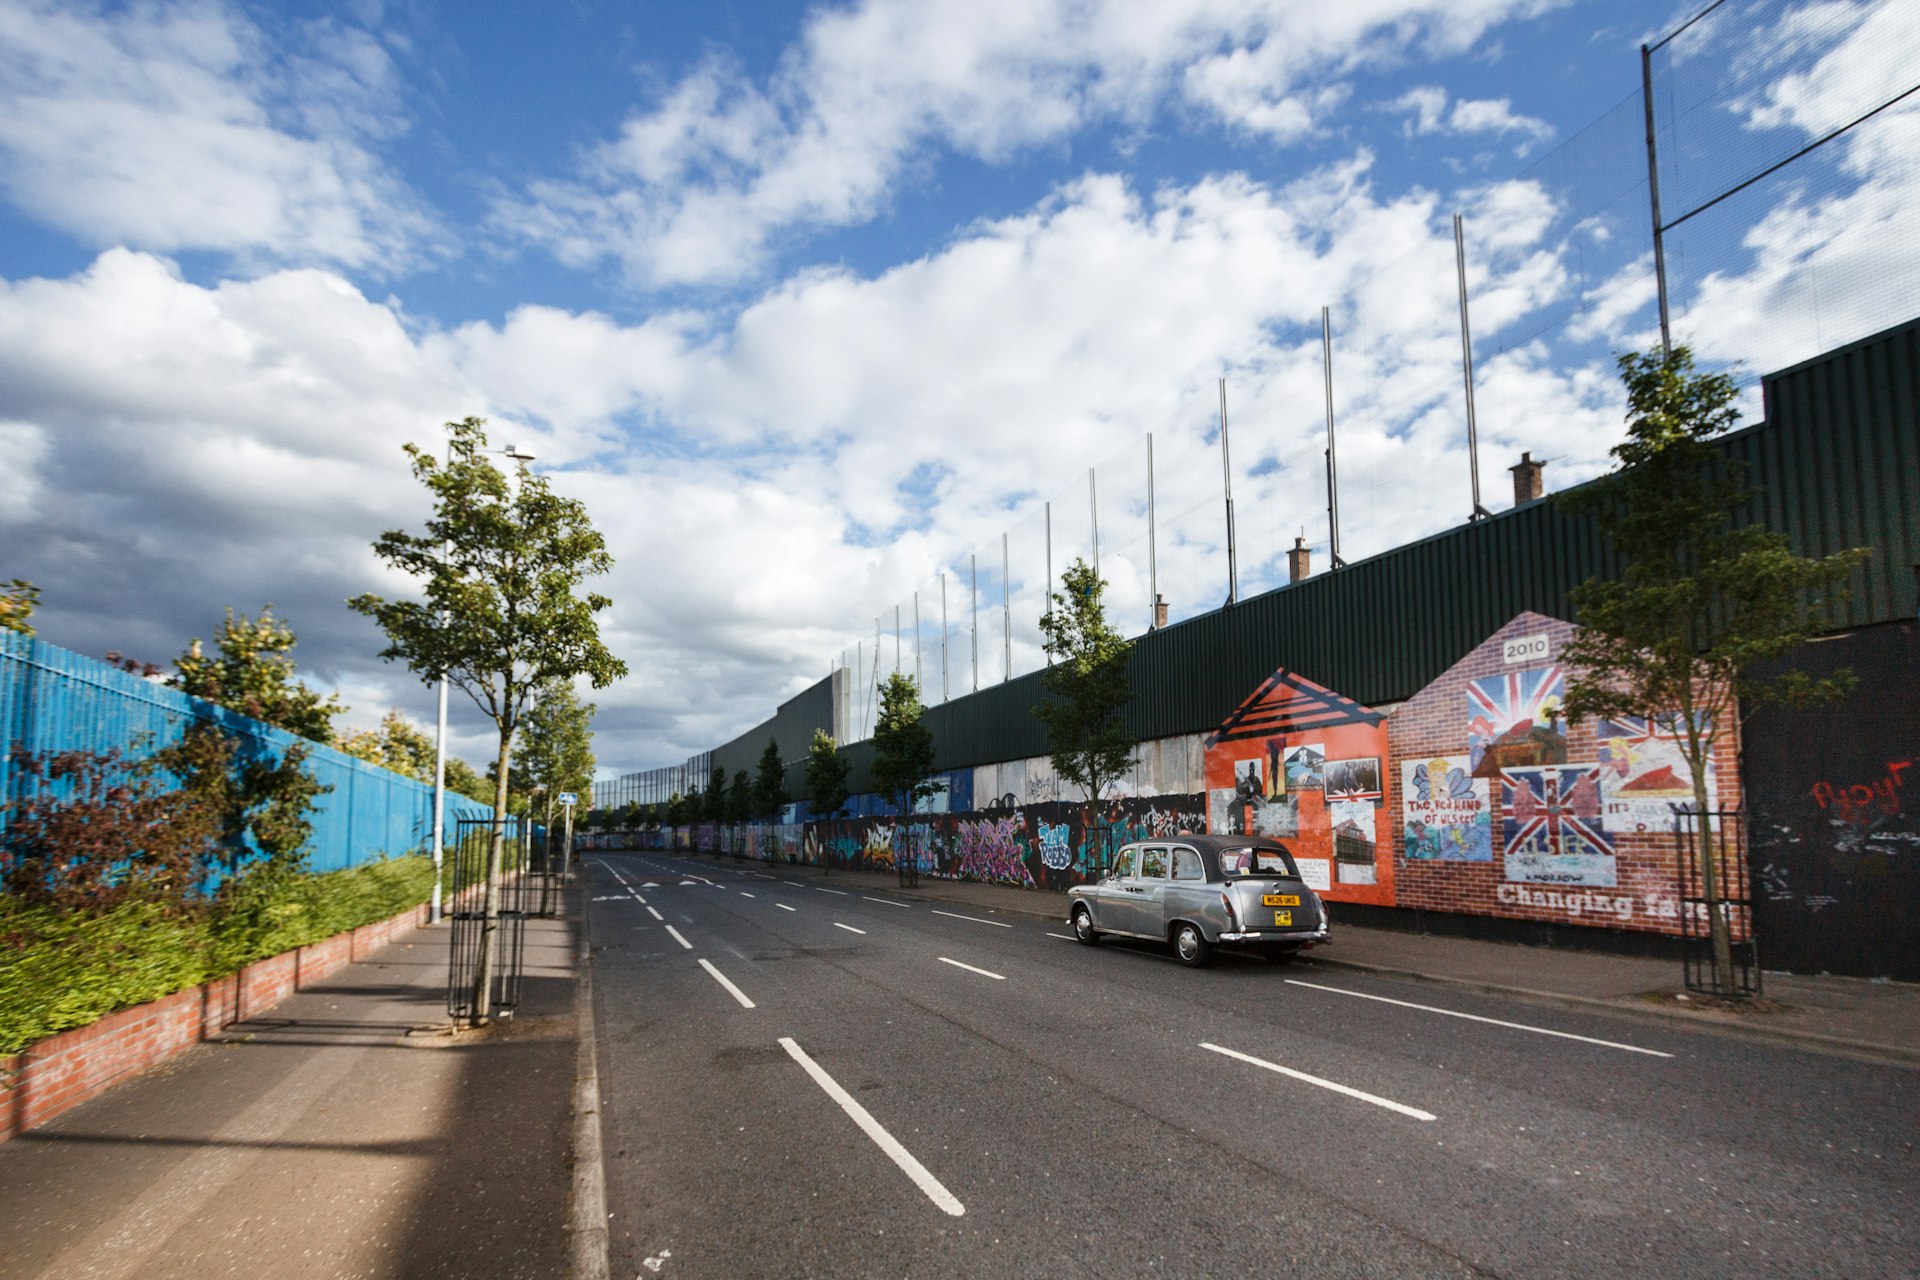 The drive along the Peace Line in West Belfast. Image by Nico Kaiser / CC BY 2.0